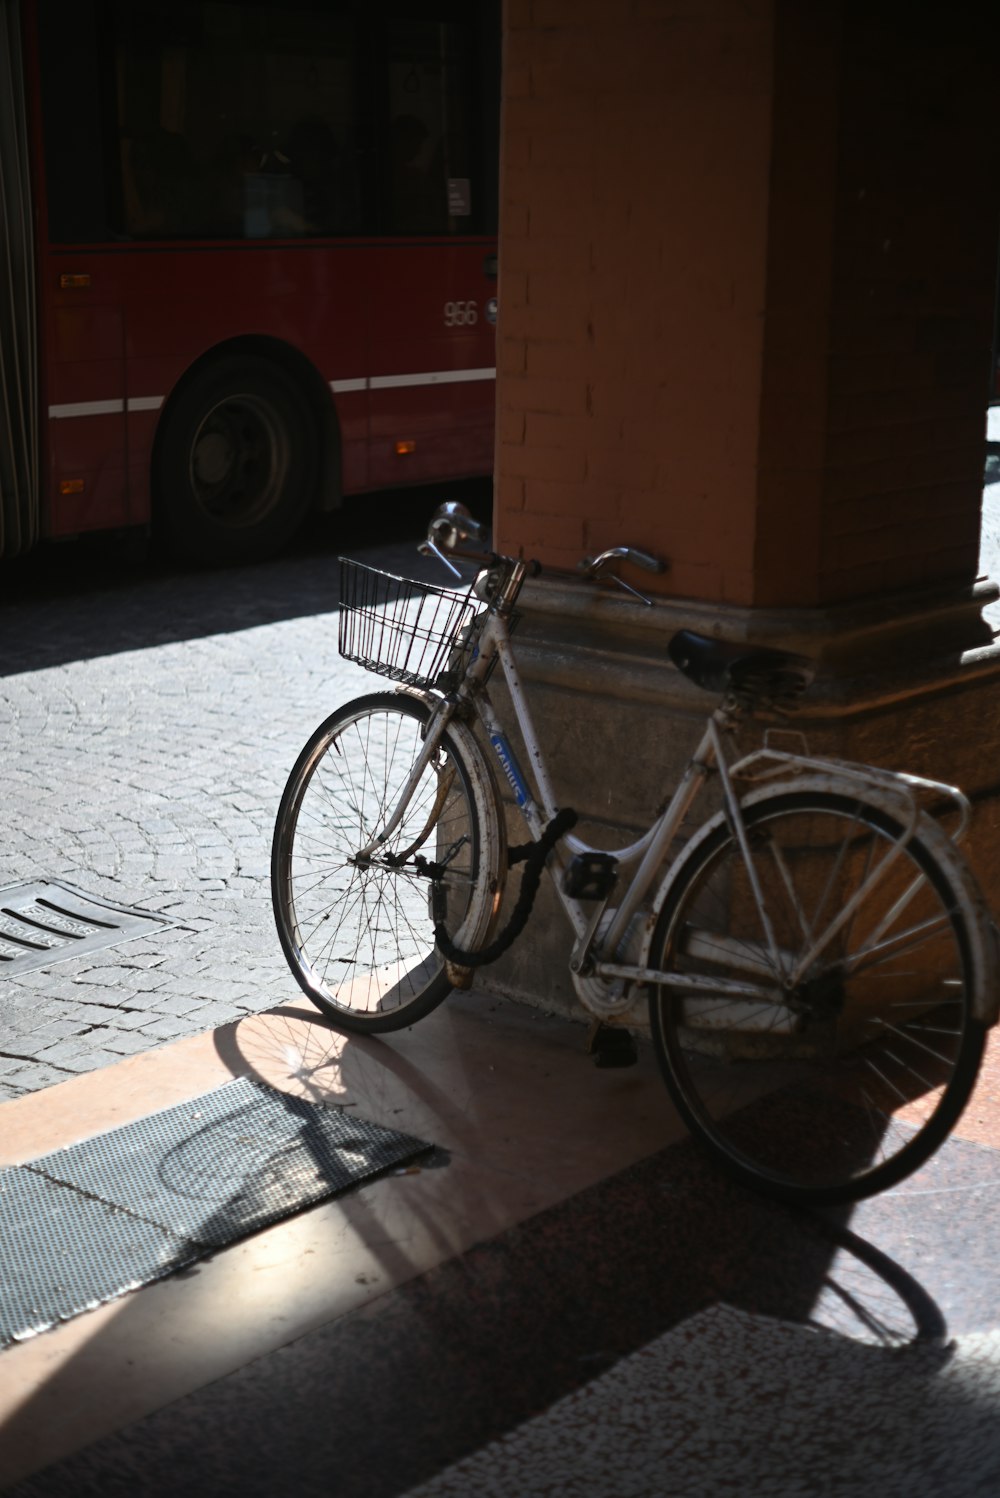 a bicycle parked next to a building on a street